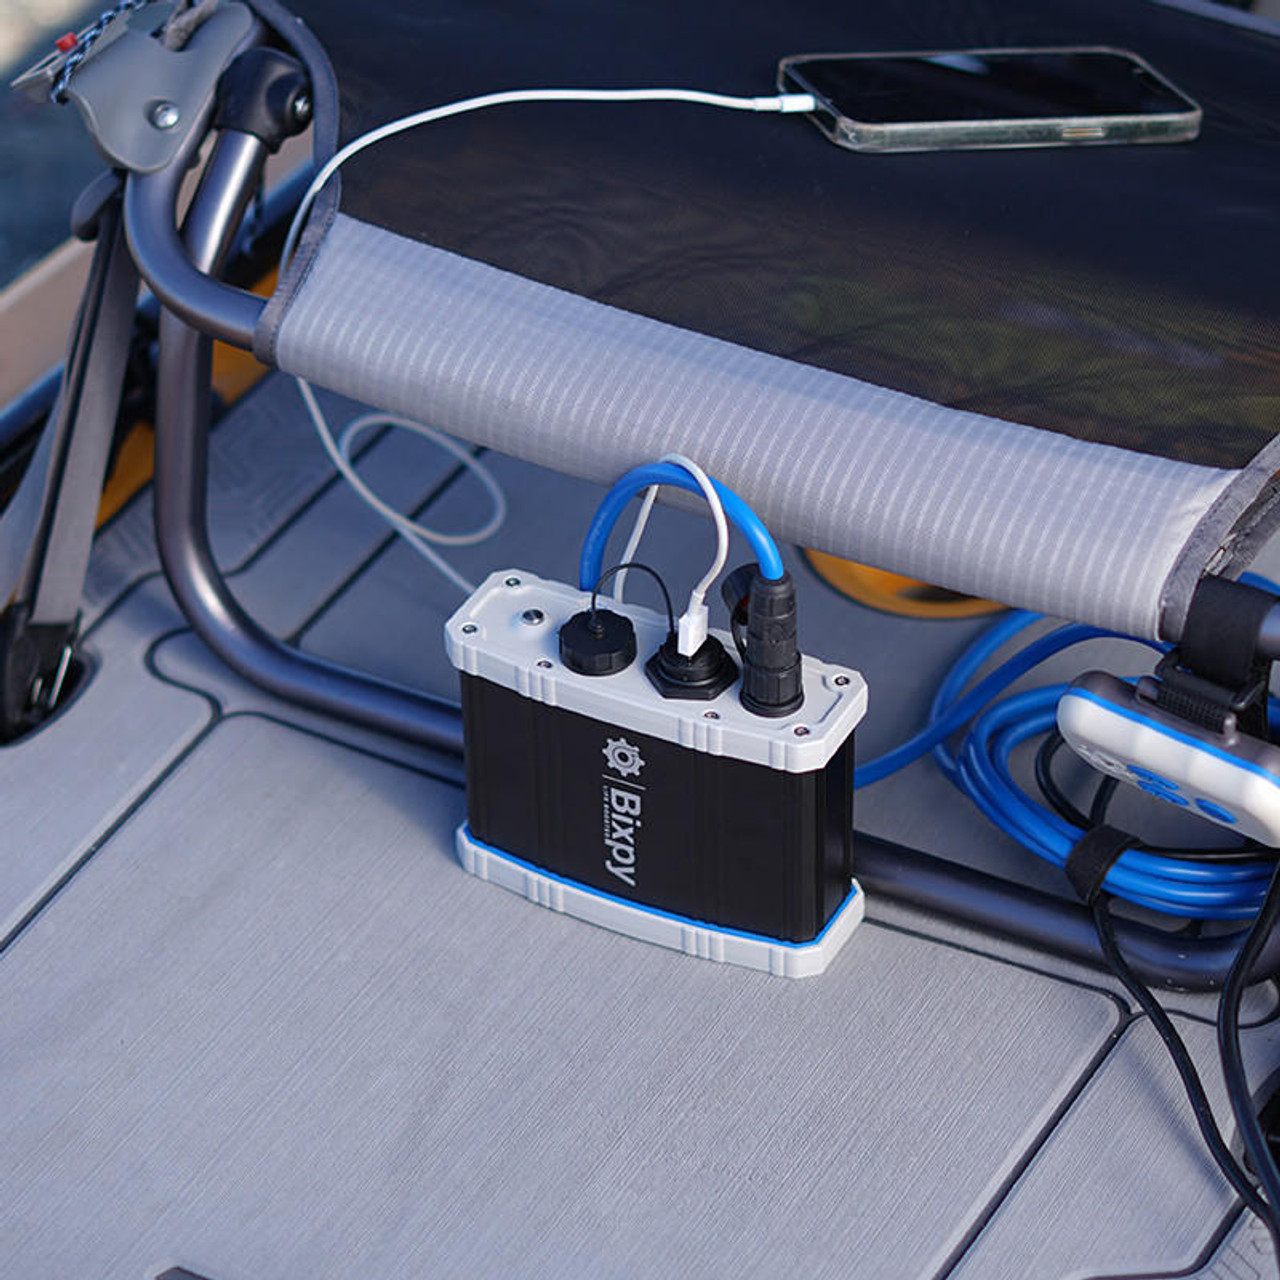 New Bixpy PP-77-AP 12V and USB Outdoor Battery on a watercraft